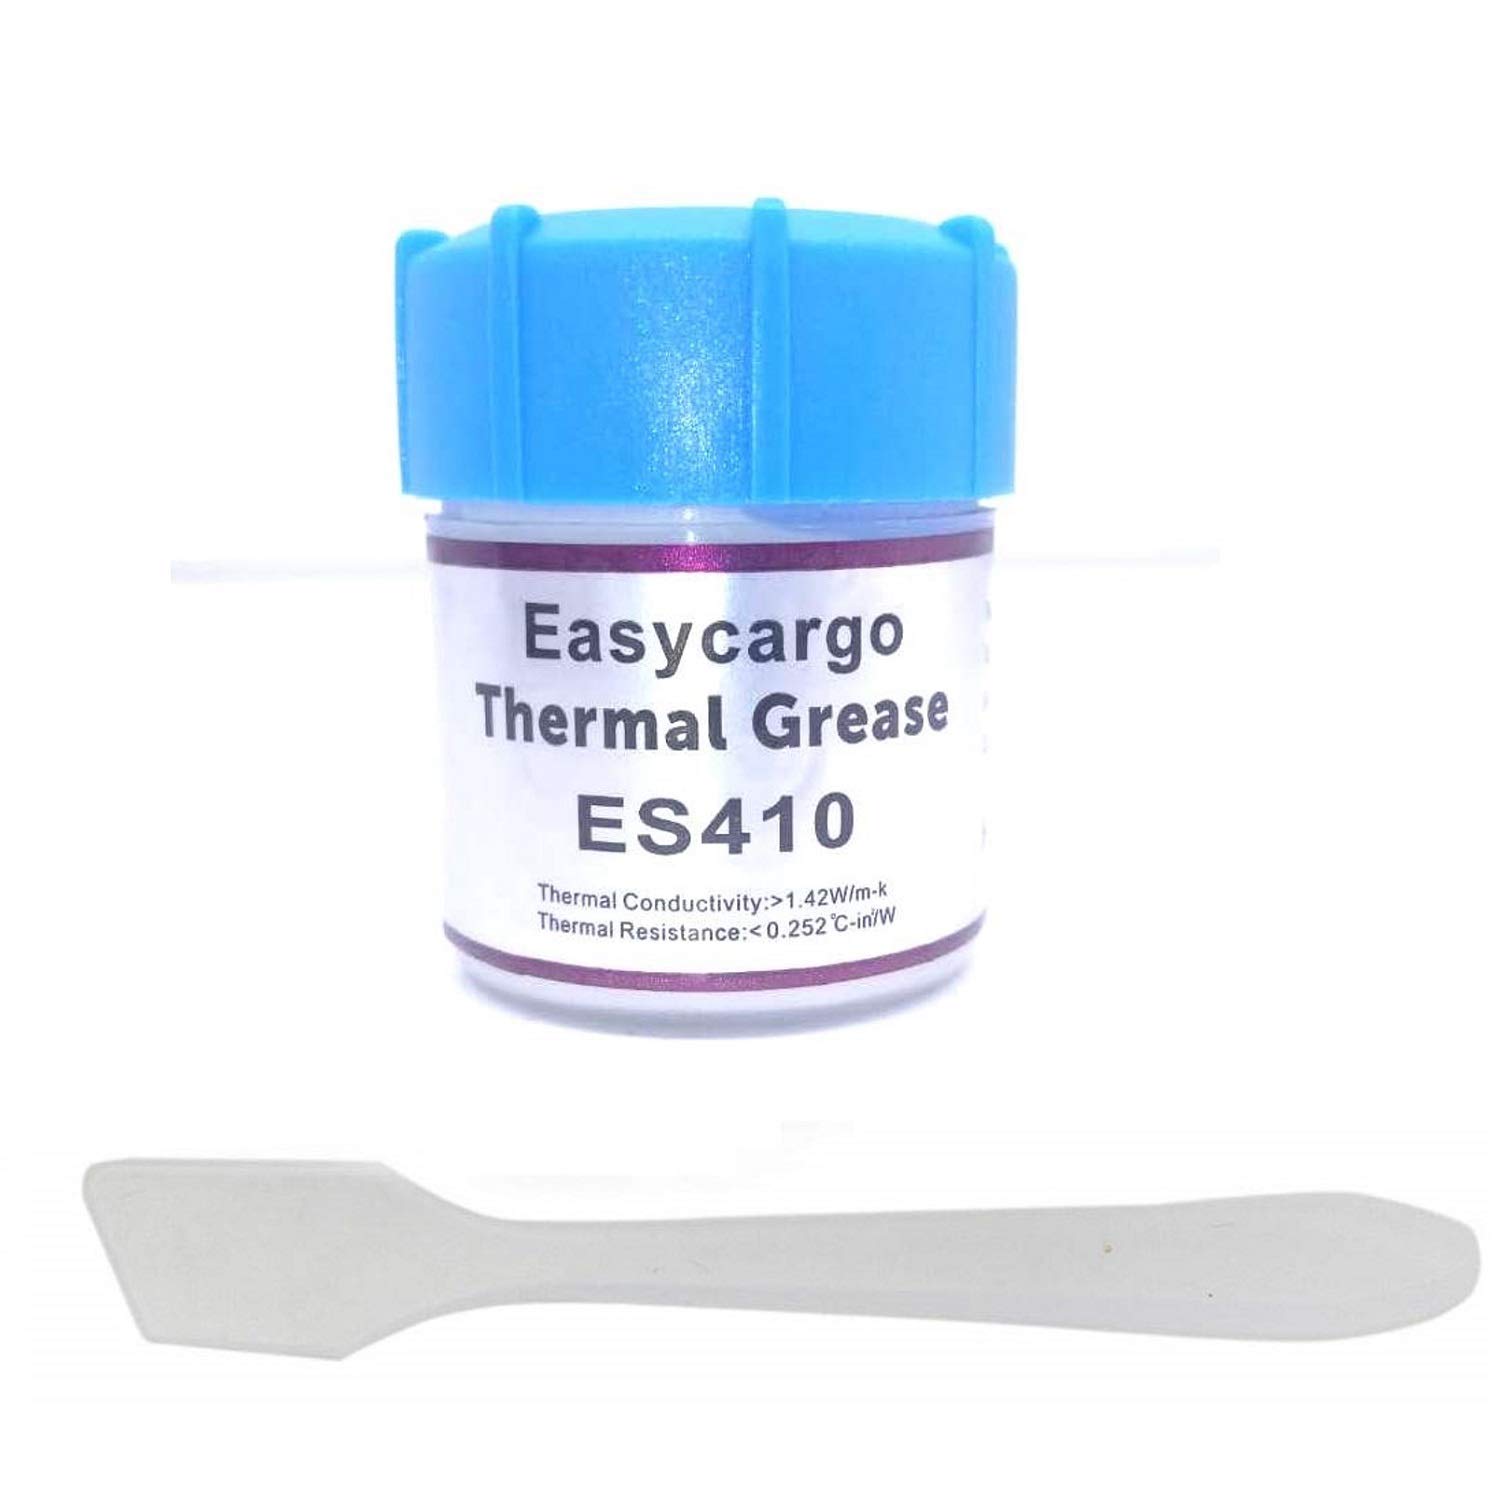 Easycargo 20gr Thermal Paste Kit Conductive Grease Heatsink White Silicone Carbon Compound For Cooling Heat Sink Interface Cpu Gpu Vga Led